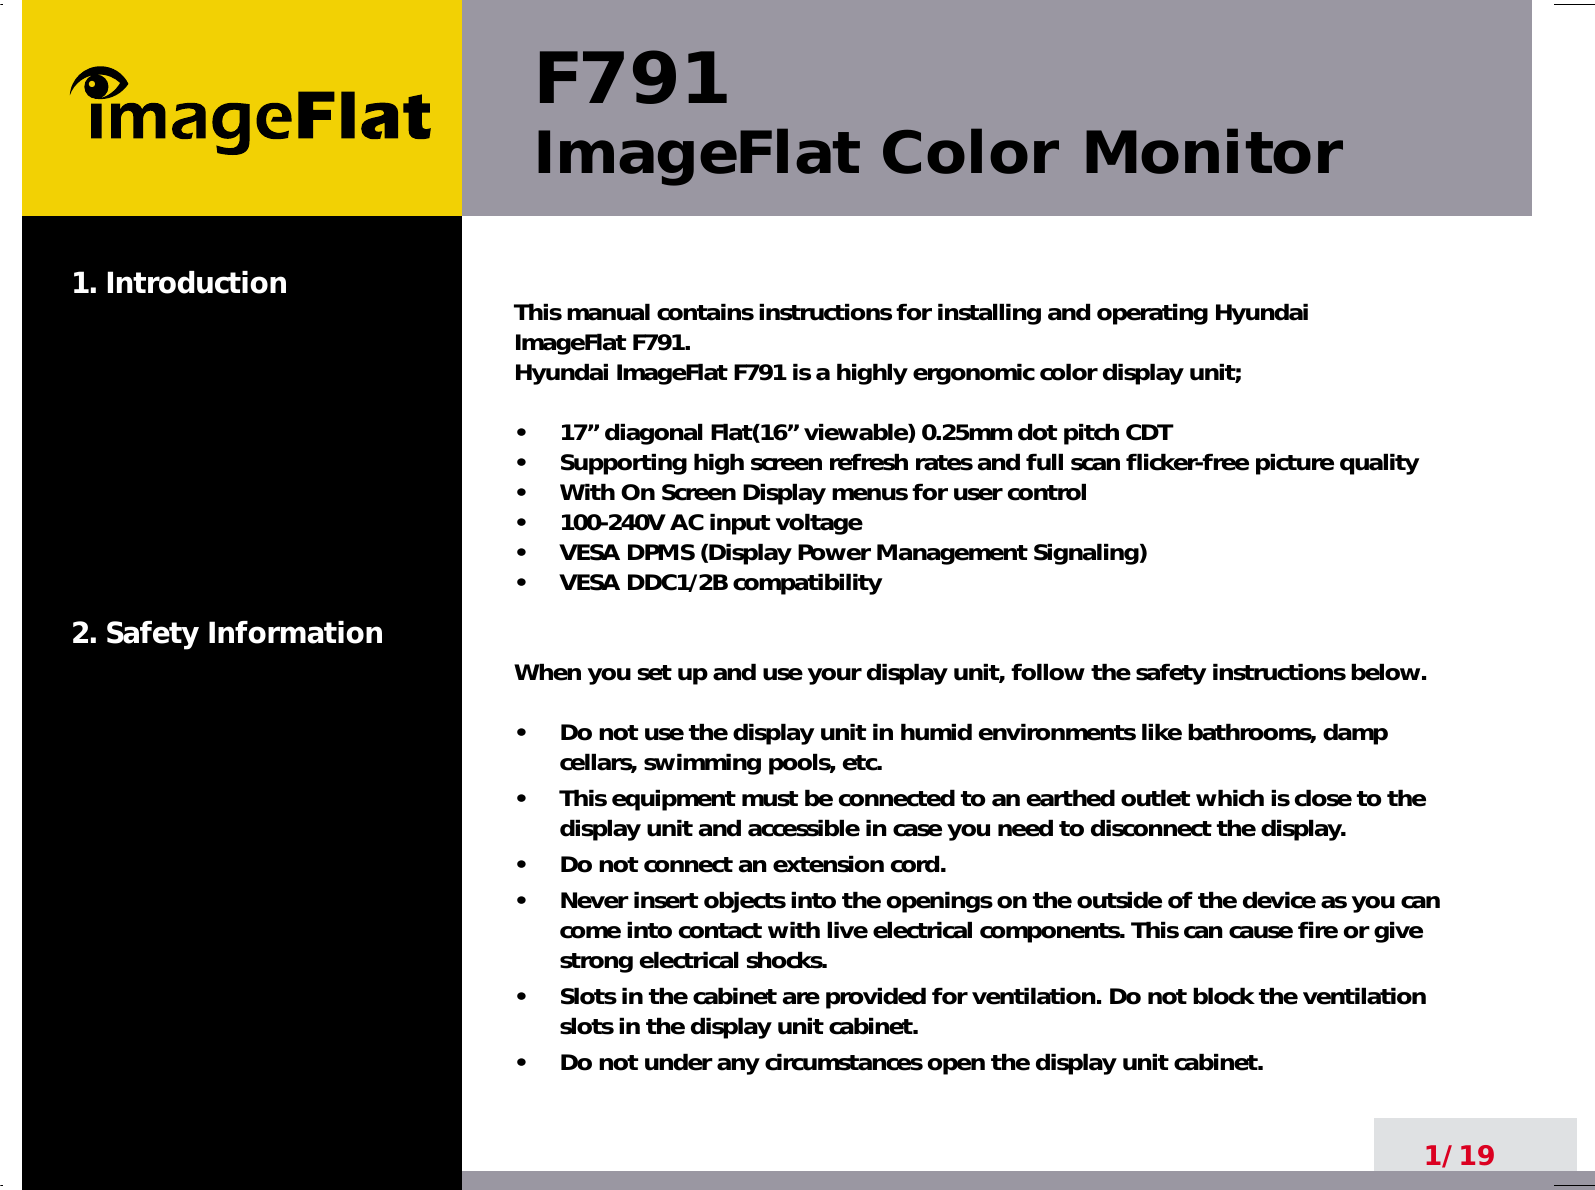 F791ImageFlat Color Monitor1. Introduction2. Safety Information1/19This manual contains instructions for installing and operating Hyundai ImageFlat F791. Hyundai ImageFlat F791 is a highly ergonomic color display unit; •     17” diagonal Flat(16” viewable) 0.25mm dot pitch CDT•     Supporting high screen refresh rates and full scan flicker-free picture quality•     With On Screen Display menus for user control•     100-240V AC input voltage•     VESA DPMS (Display Power Management Signaling)•     VESA DDC1/2B compatibilityWhen you set up and use your display unit, follow the safety instructions below.•     Do not use the display unit in humid environments like bathrooms, dampcellars, swimming pools, etc.•     This equipment must be connected to an earthed outlet which is close to thedisplay unit and accessible in case you need to disconnect the display.•     Do not connect an extension cord.•     Never insert objects into the openings on the outside of the device as you cancome into contact with live electrical components. This can cause fire or givestrong electrical shocks.•     Slots in the cabinet are provided for ventilation. Do not block the ventilationslots in the display unit cabinet.•     Do not under any circumstances open the display unit cabinet.